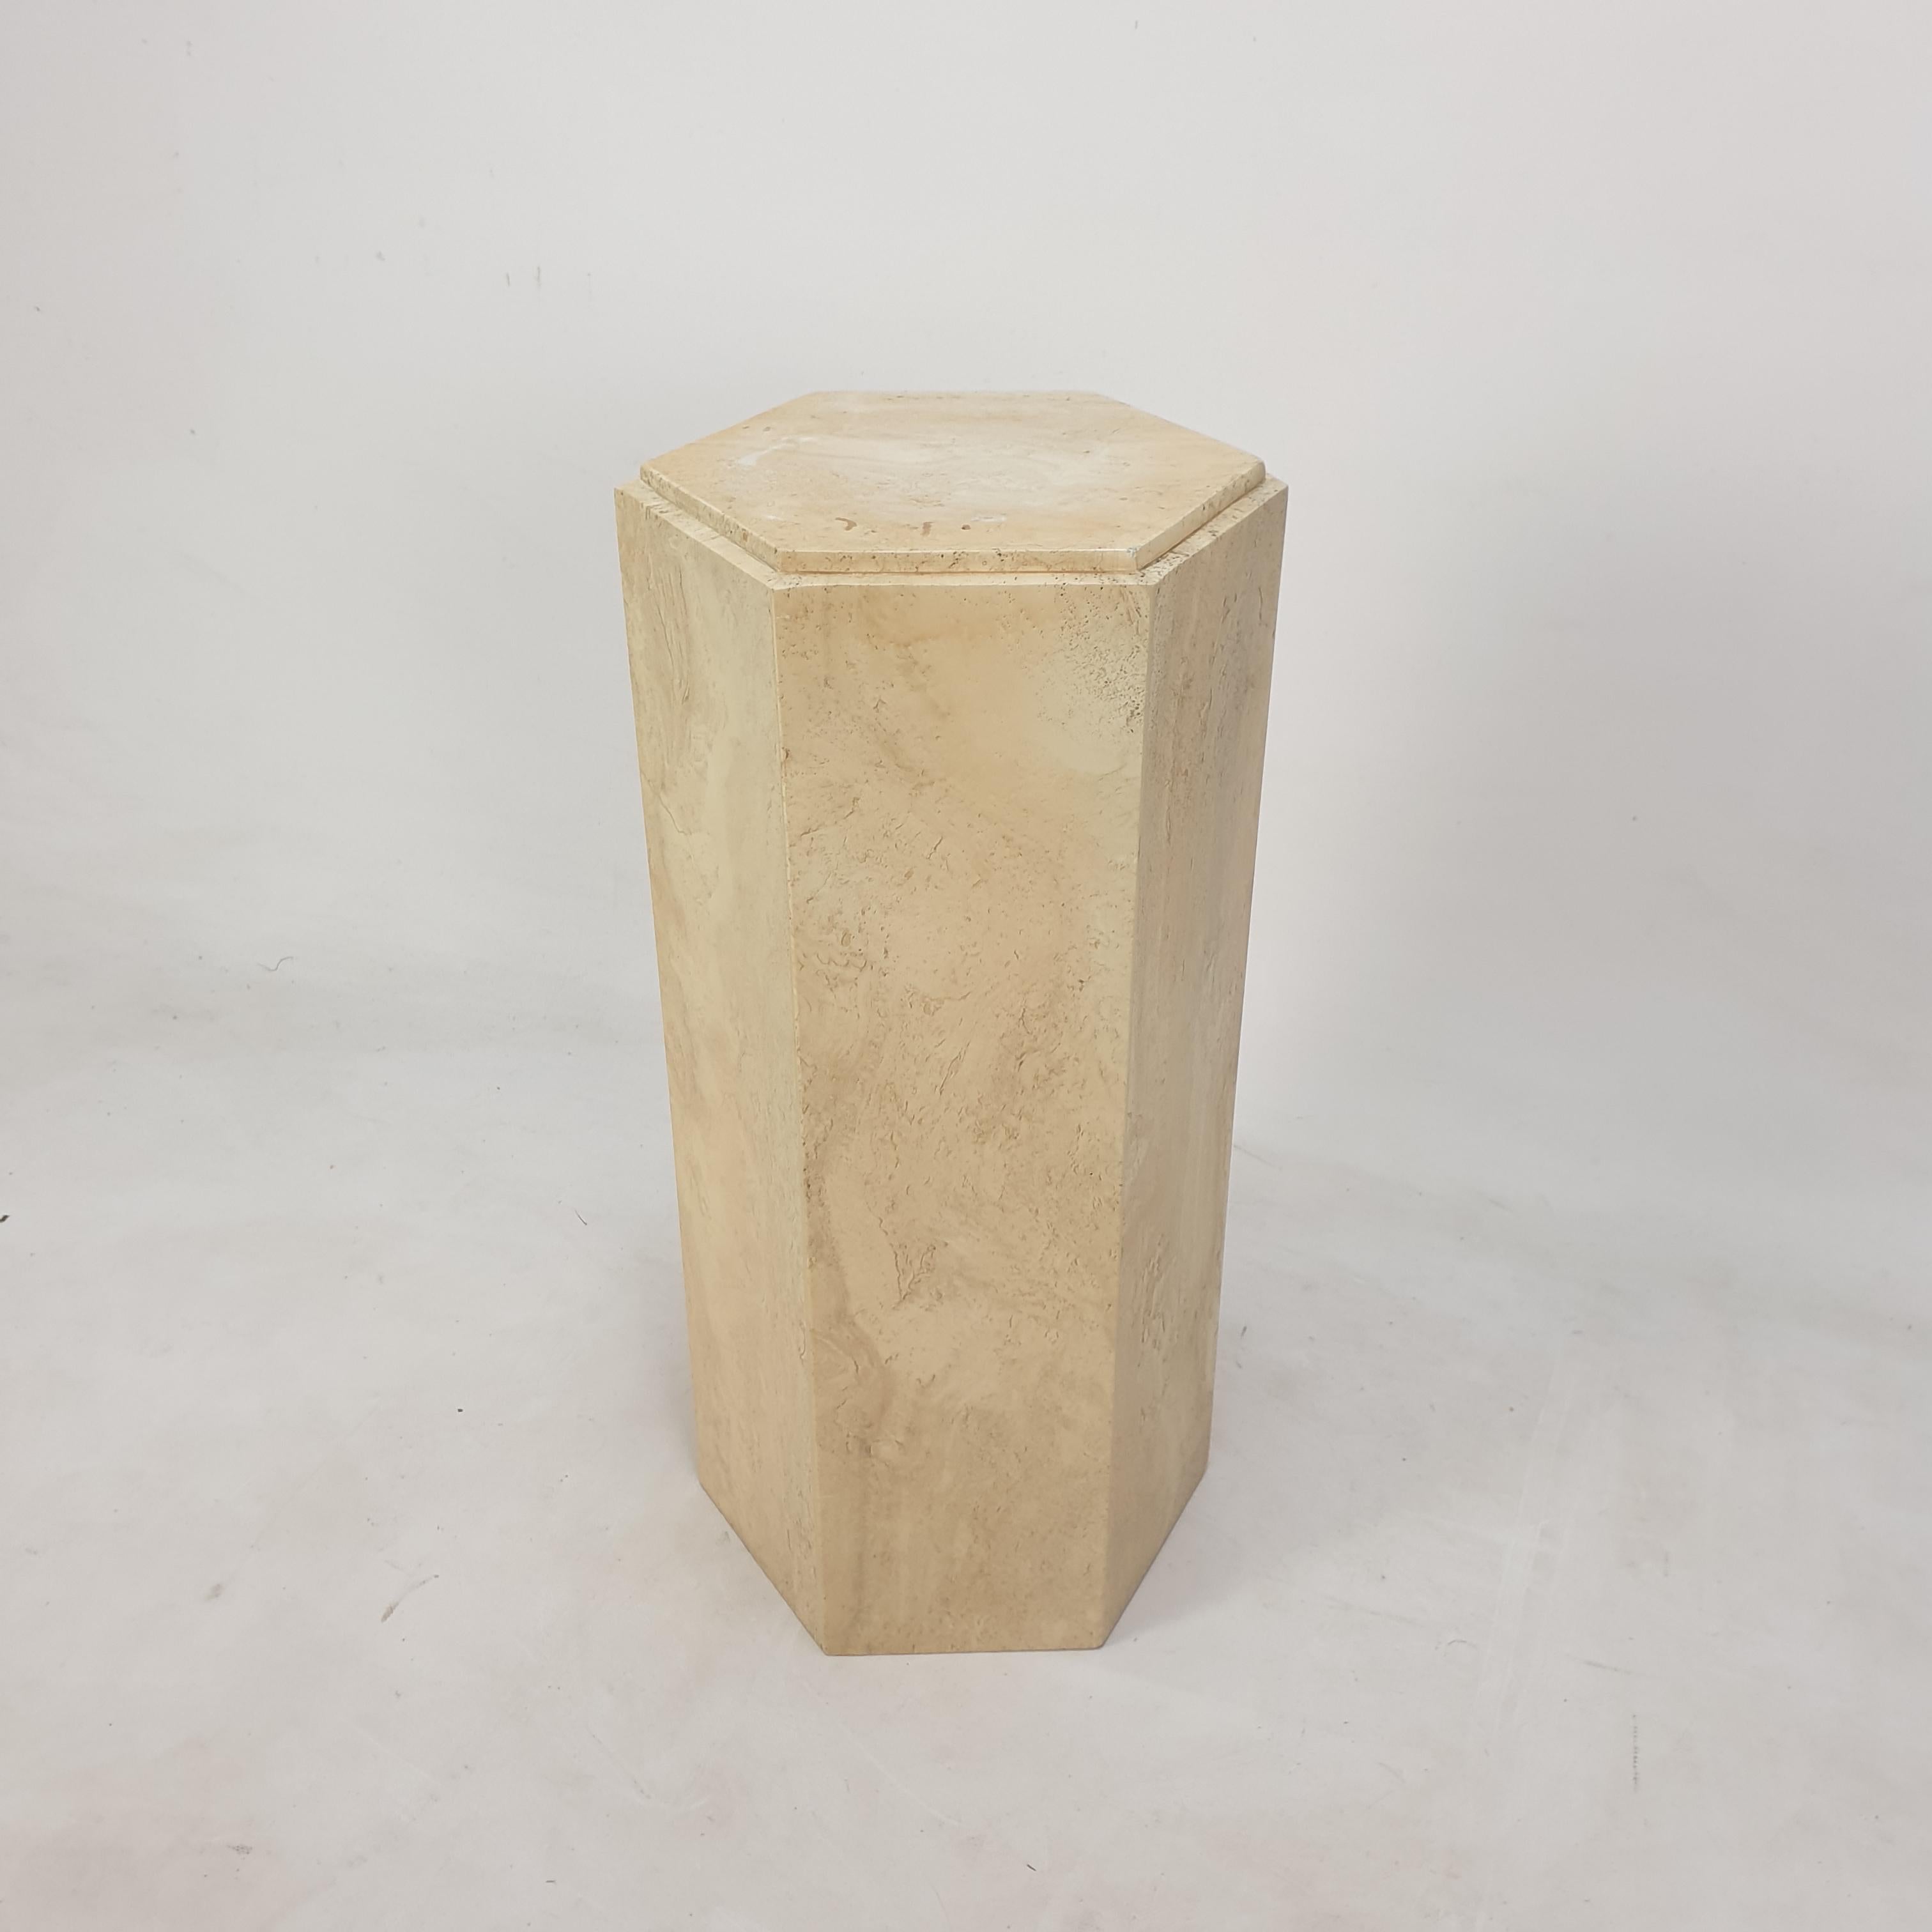 Hand-Crafted Italian Travertine Side Table or Pedestal, 1980's